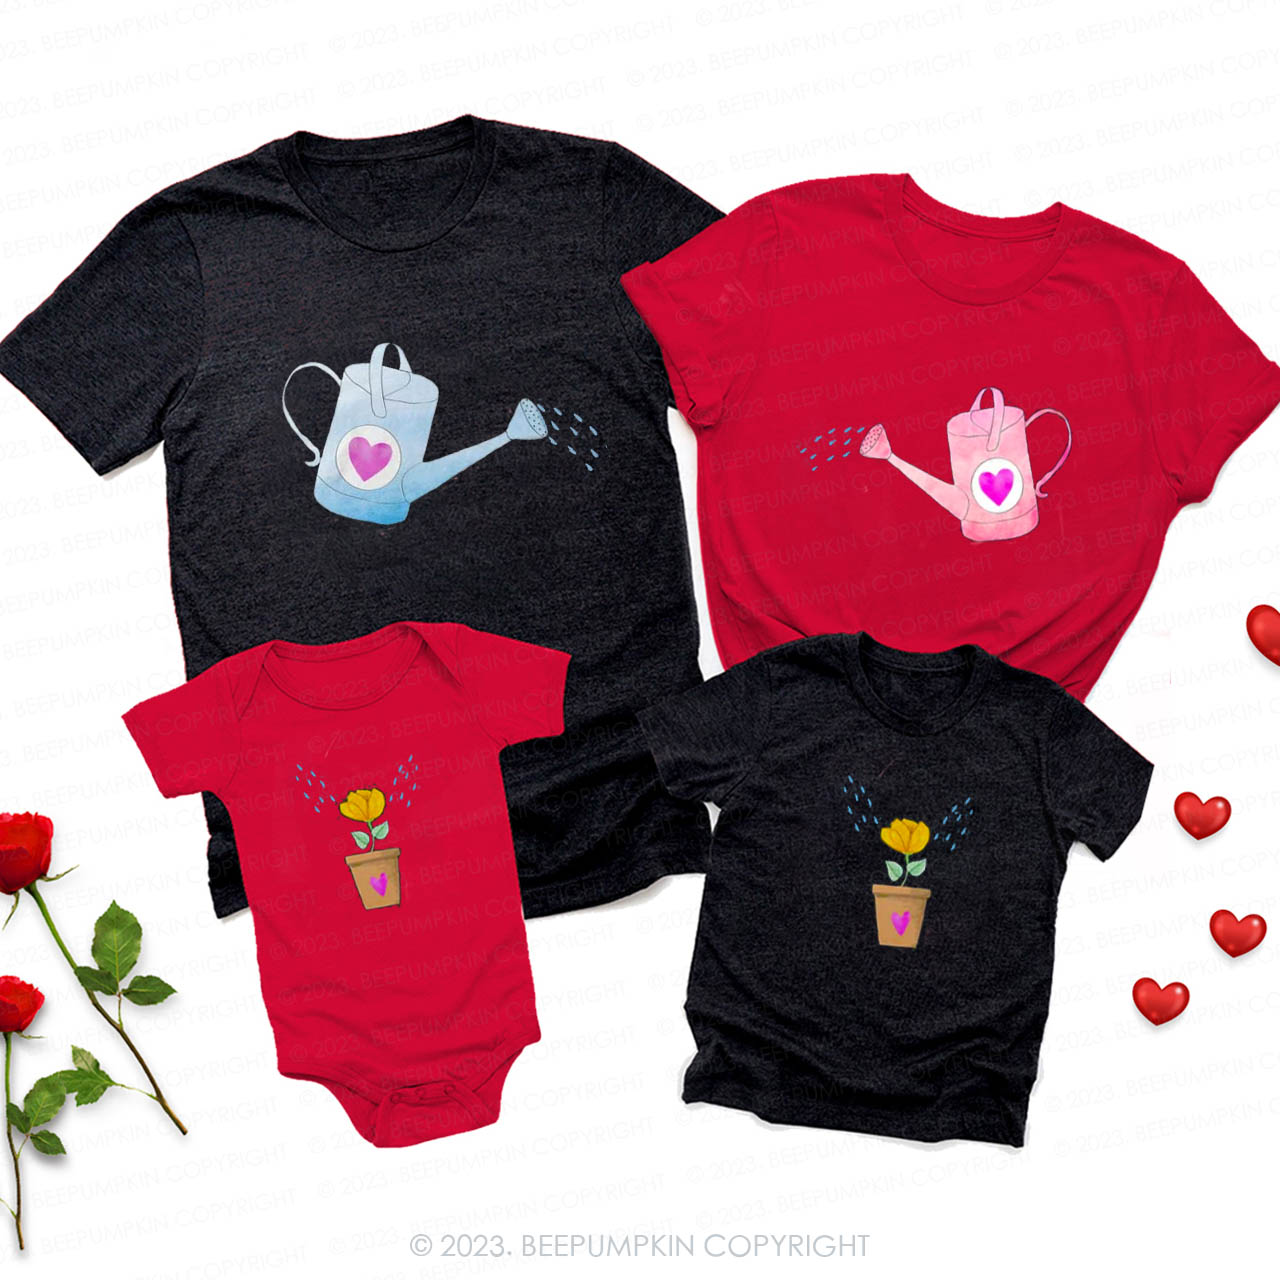 Give Birth to New Life Valentines Day Matching Shirts